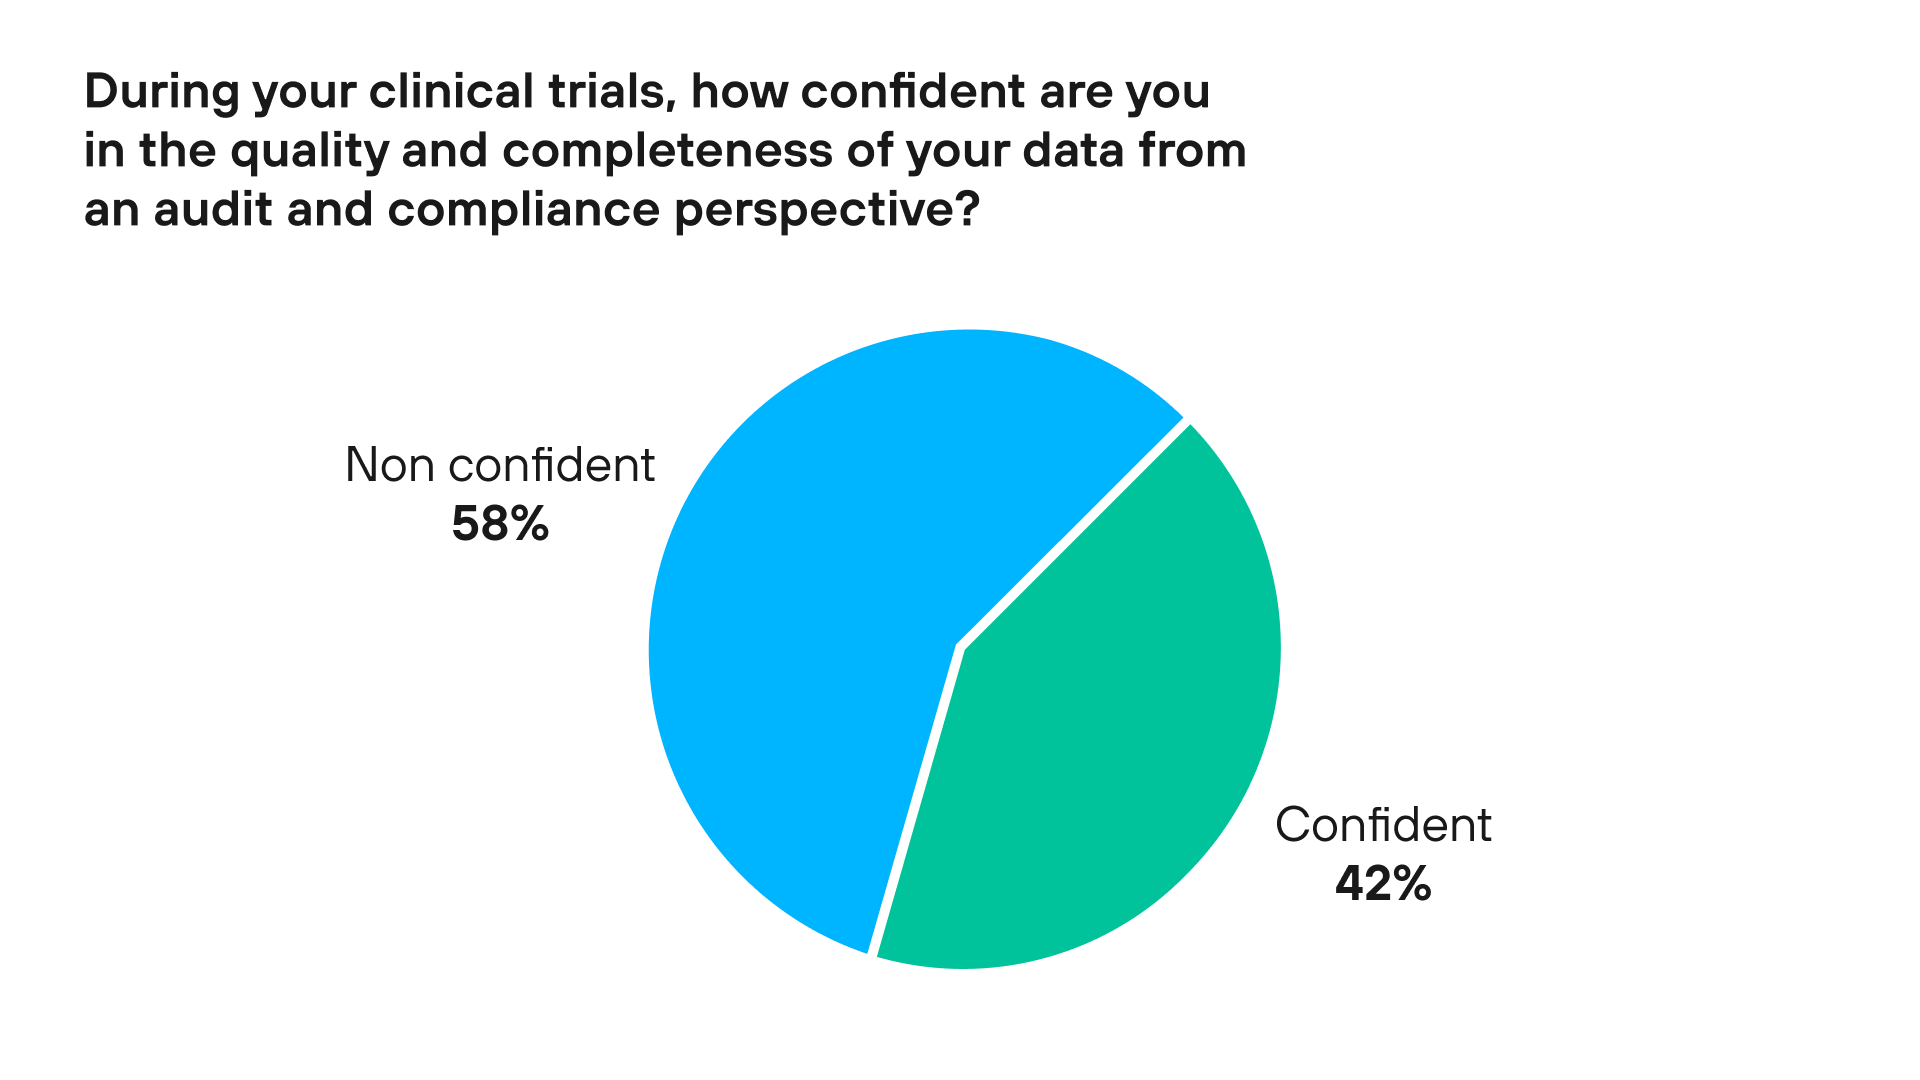 confidence in the quality of data